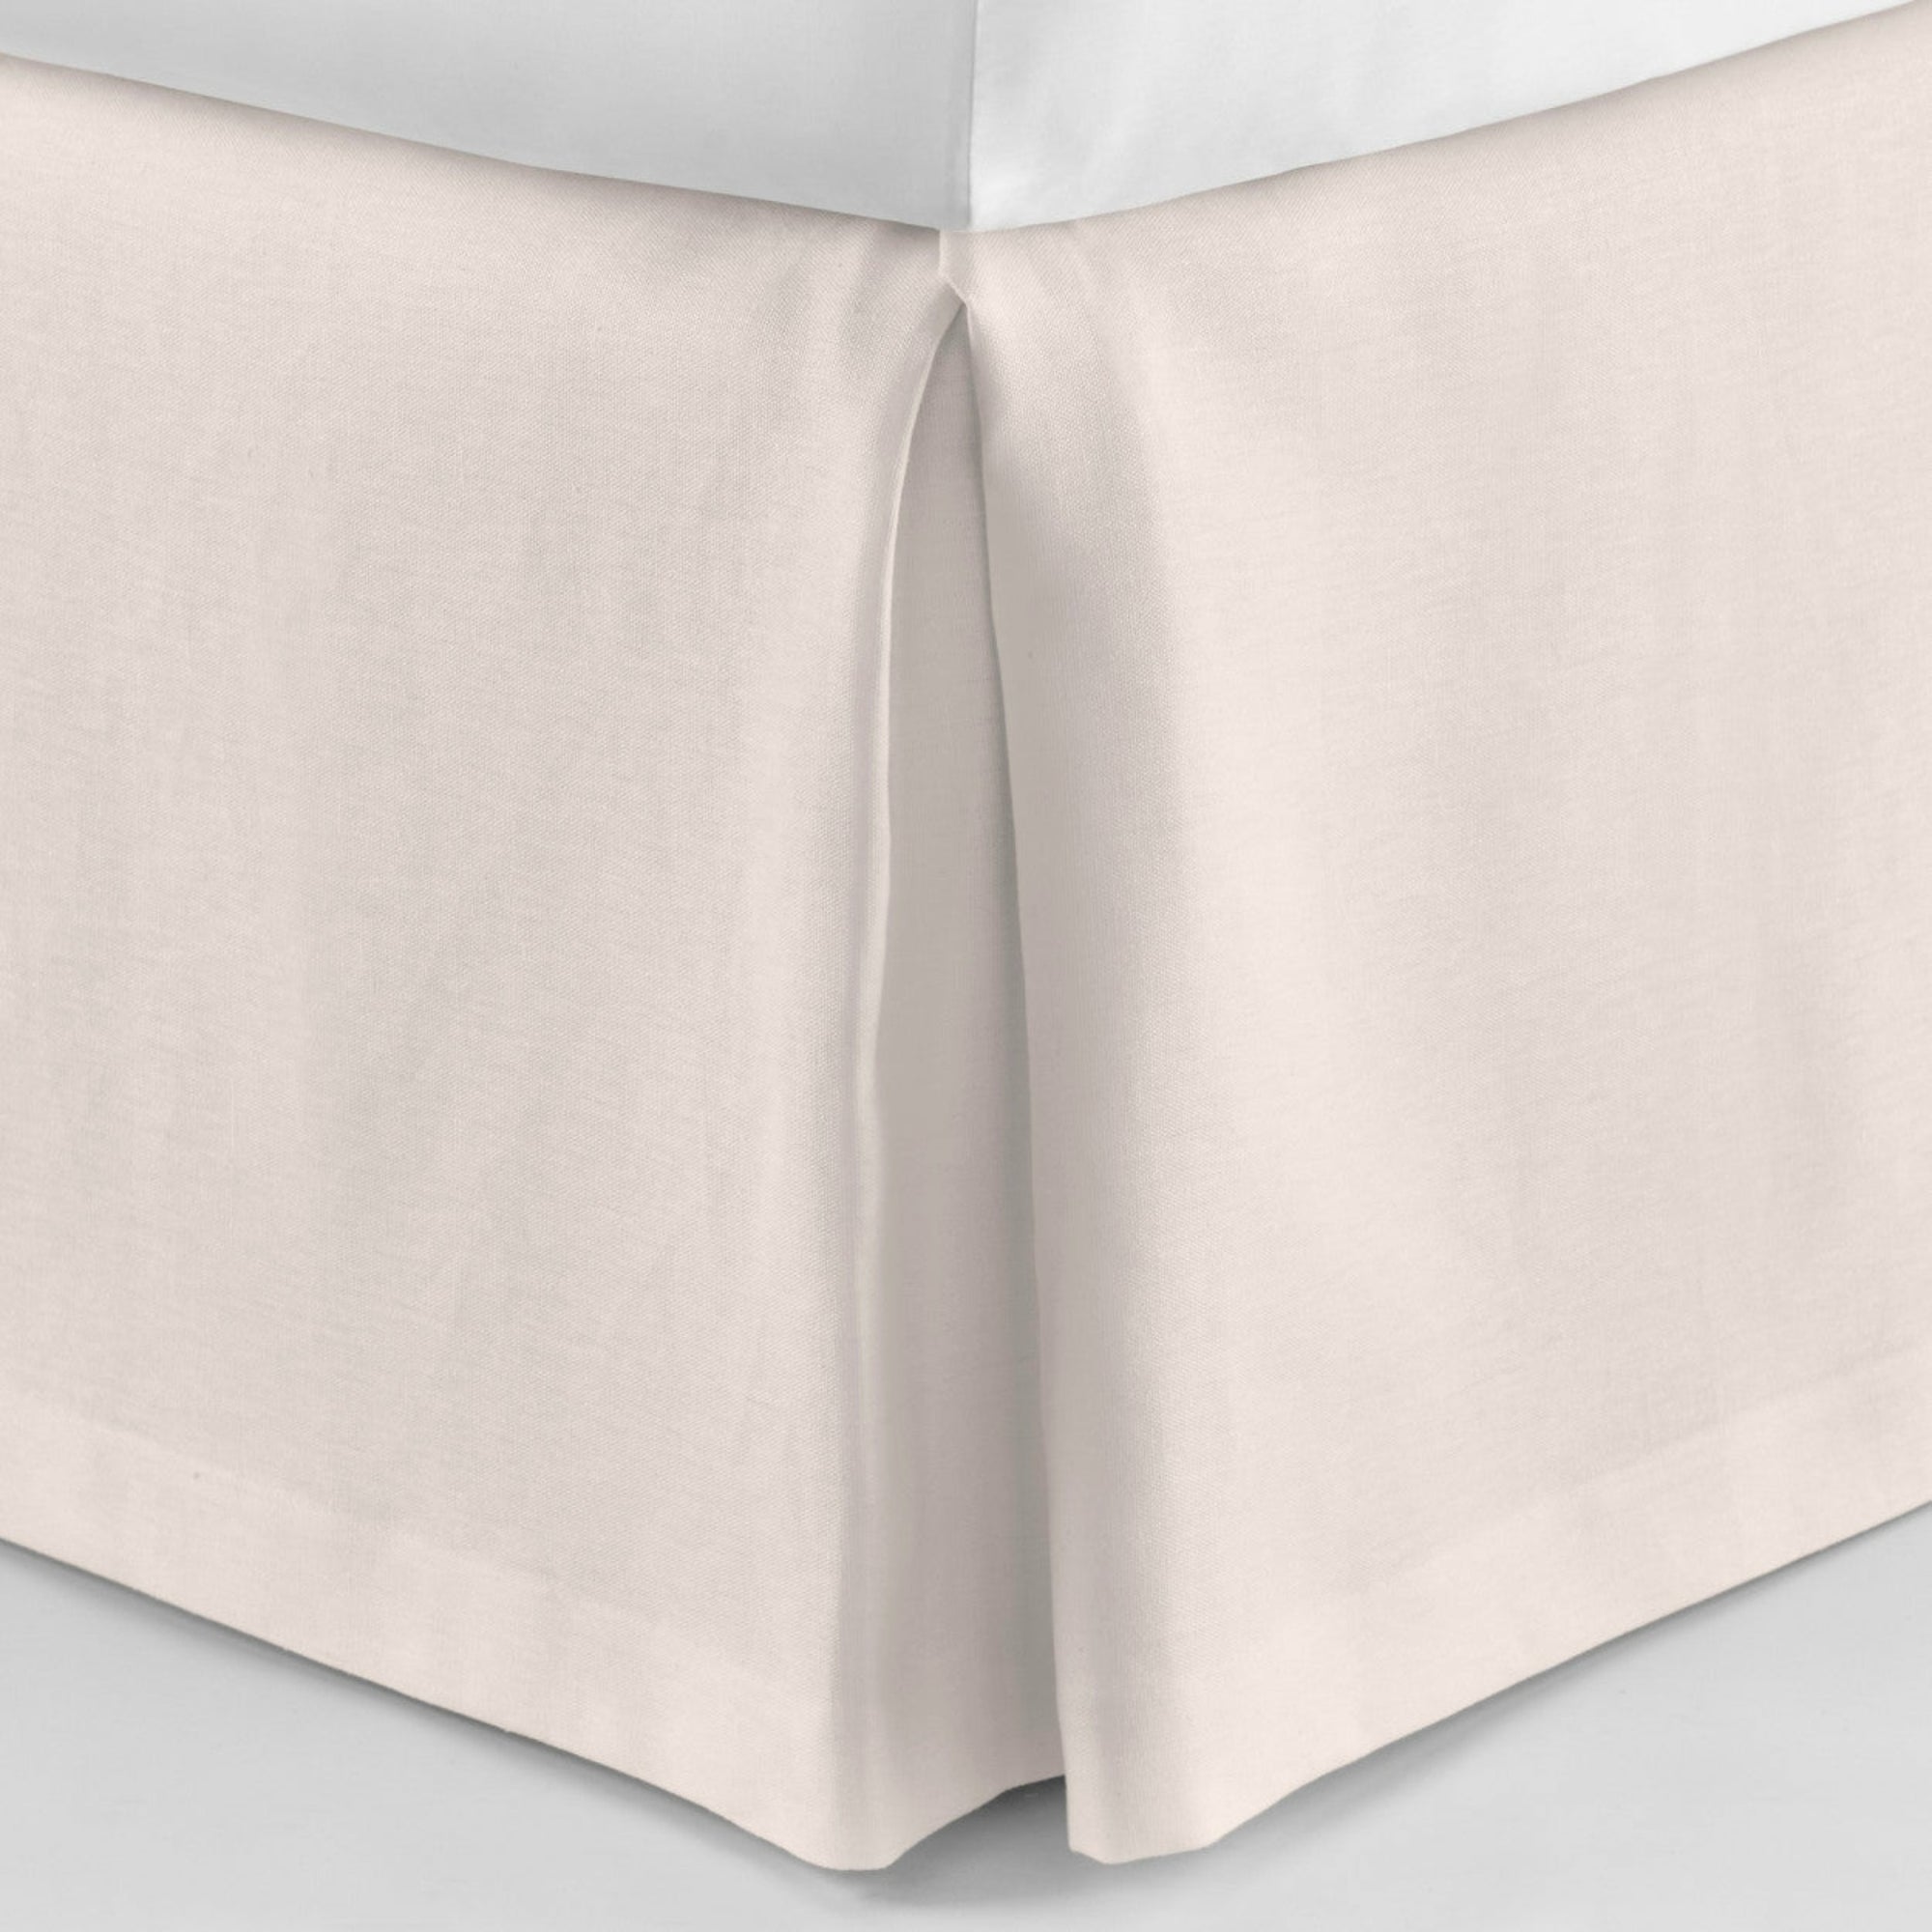 Peacock Alley Mandalay Tailored Bed Skirt Blush Fine Linens